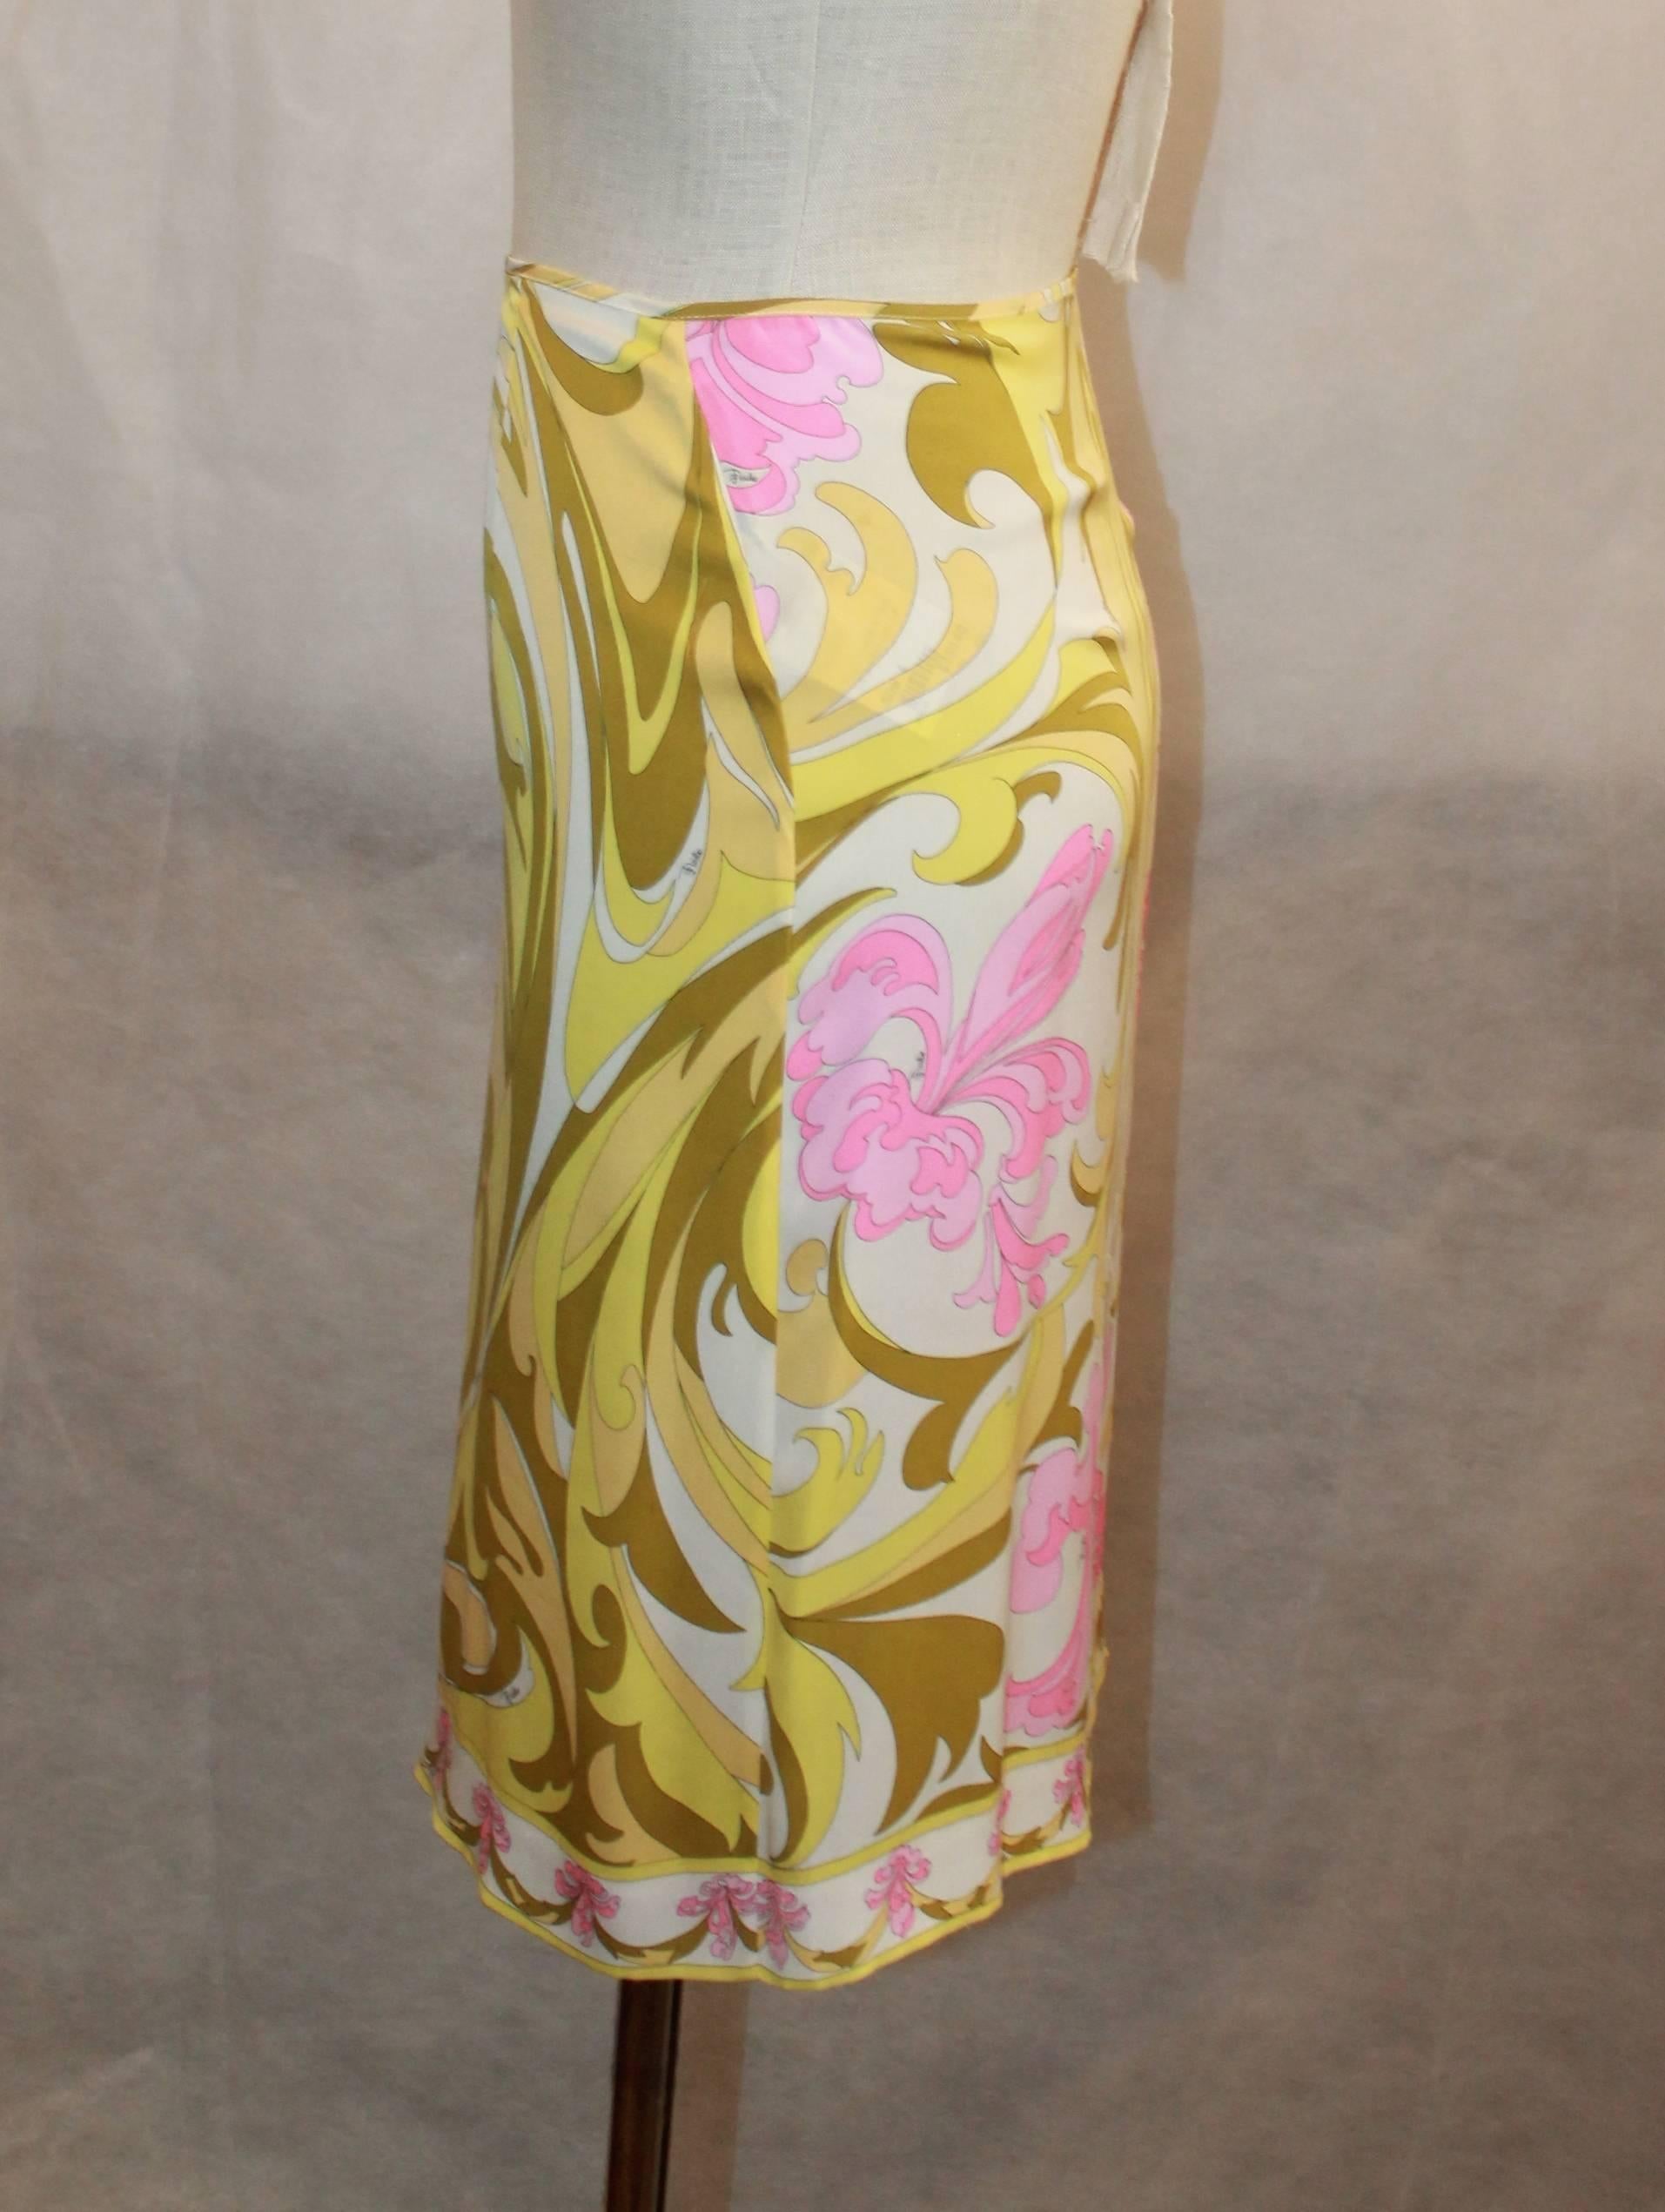 Emilio Pucci Yellow, Green & Pink Printed Skirt - 4 - 1980's. This skirt is in good vintage condition with some pulls consistent with the piece's age. It features a large print and a side zipper.

Measurements:
Waist- 27.5